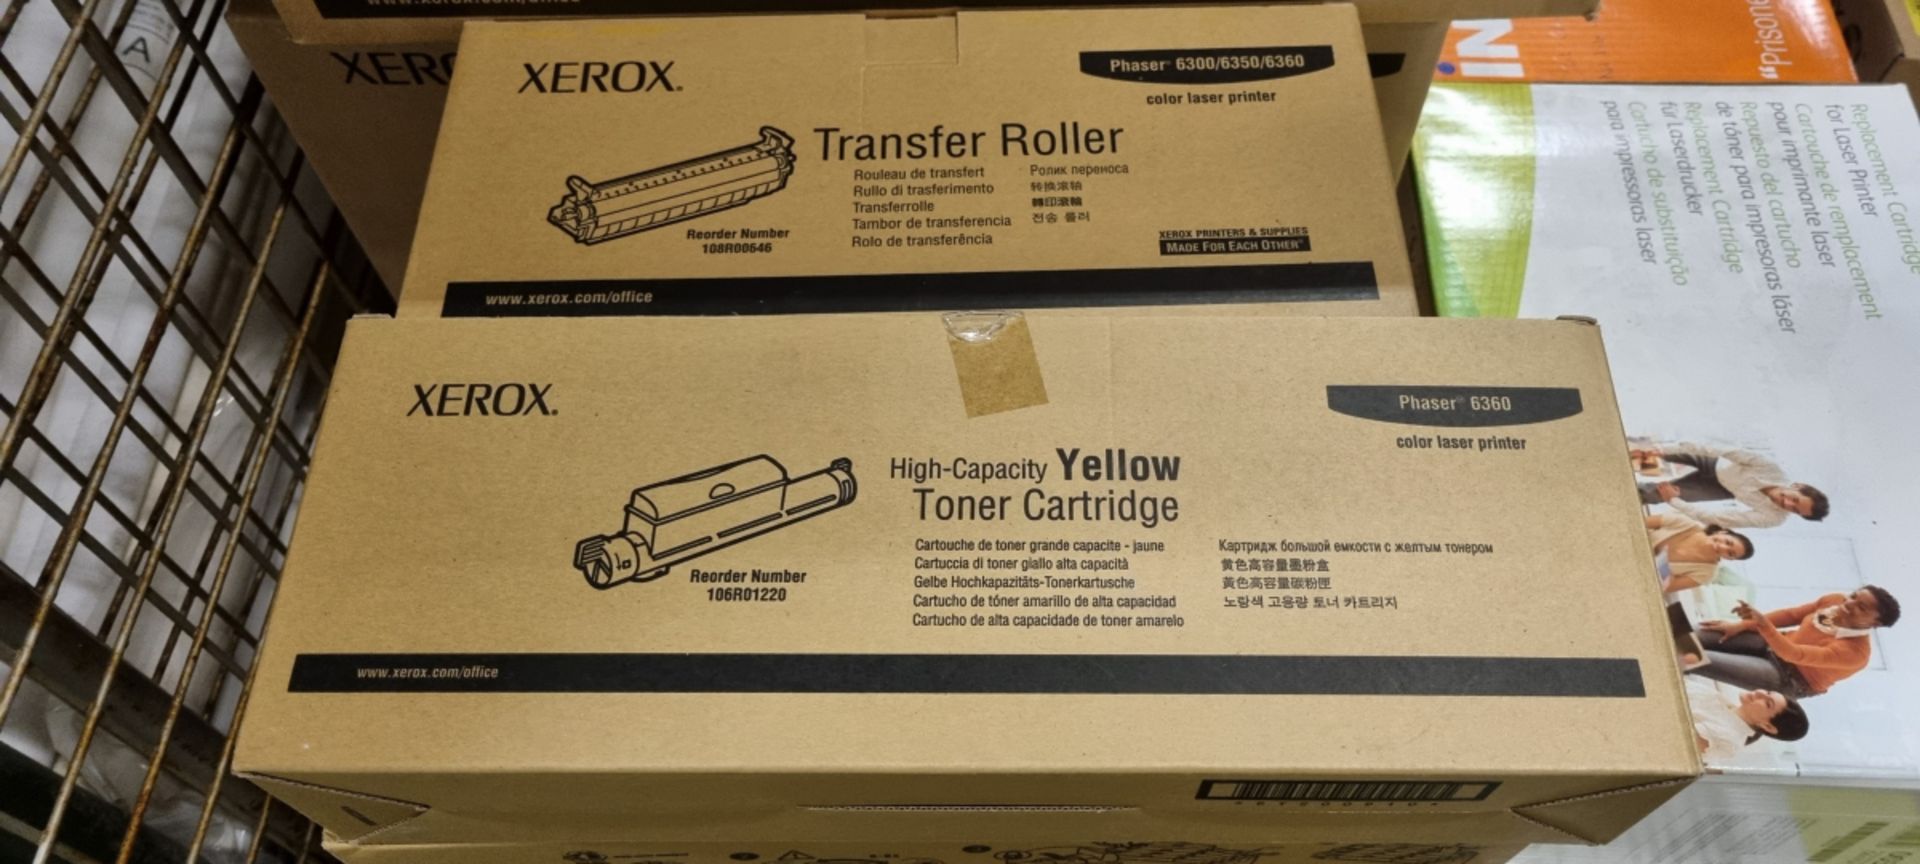 28x boxes of toners and transfer rollers - Xerox 6360, Xerox 7750, Xerox 3610 and HP 3600 - Image 3 of 7